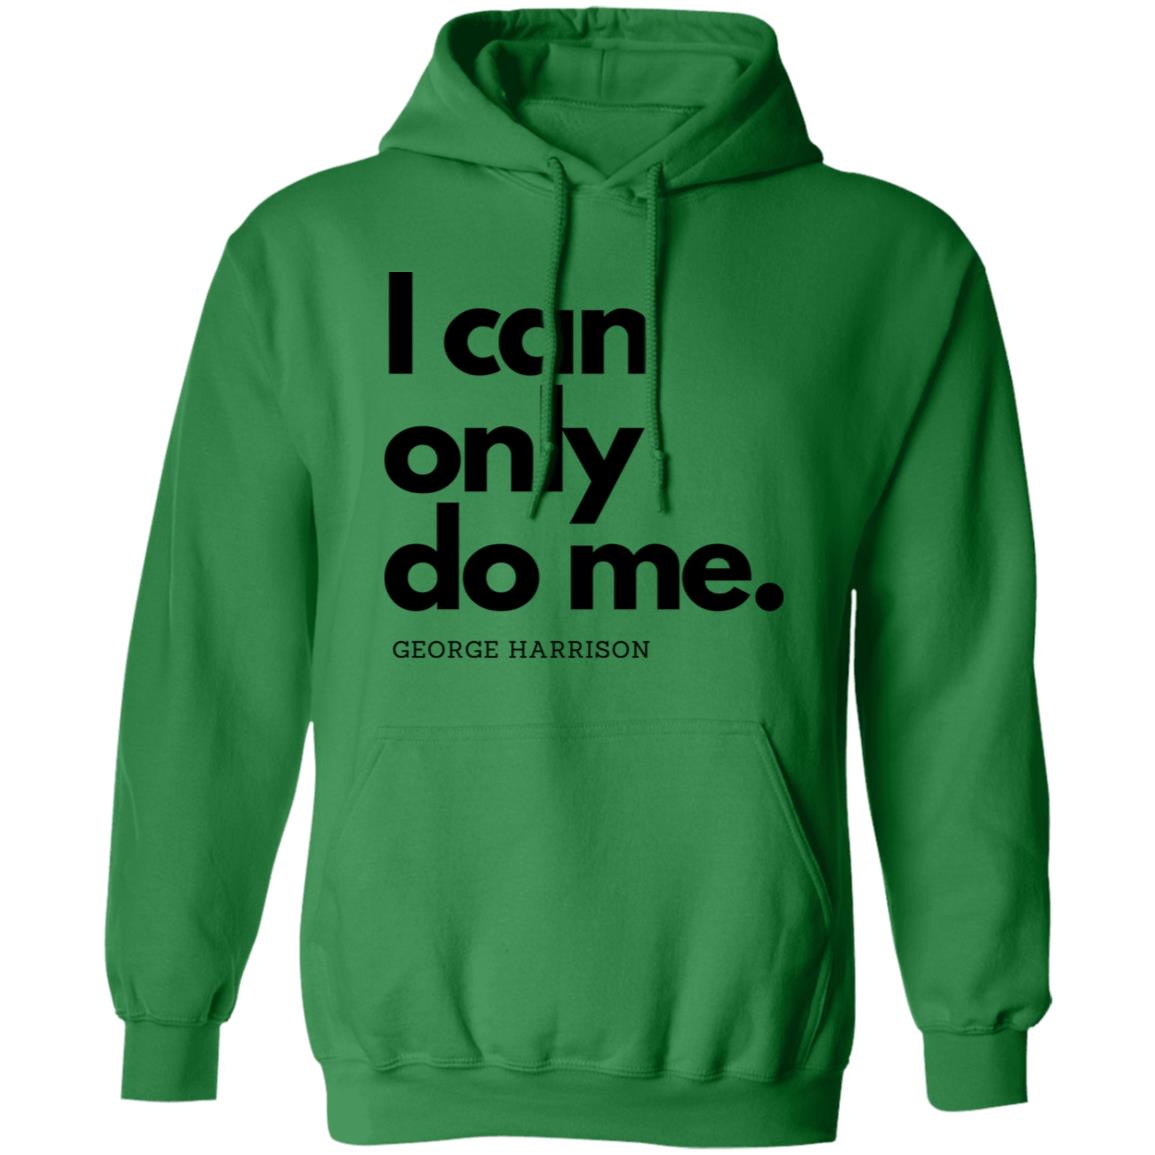 I can only do me. Hoodie